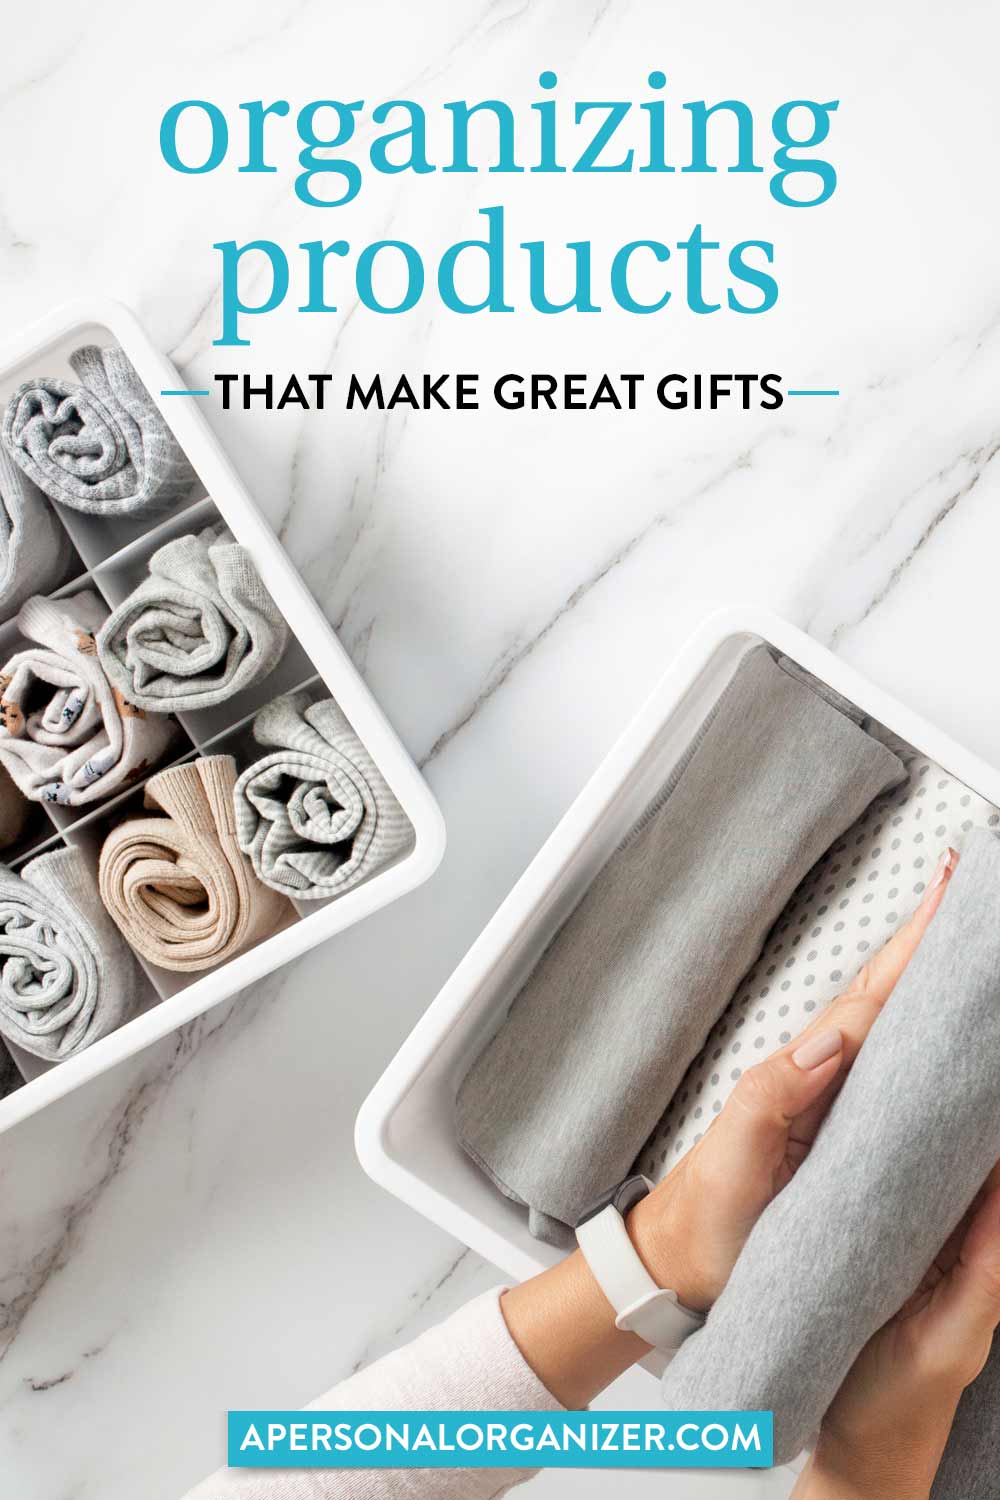 Organizing Products Make Great Gifts